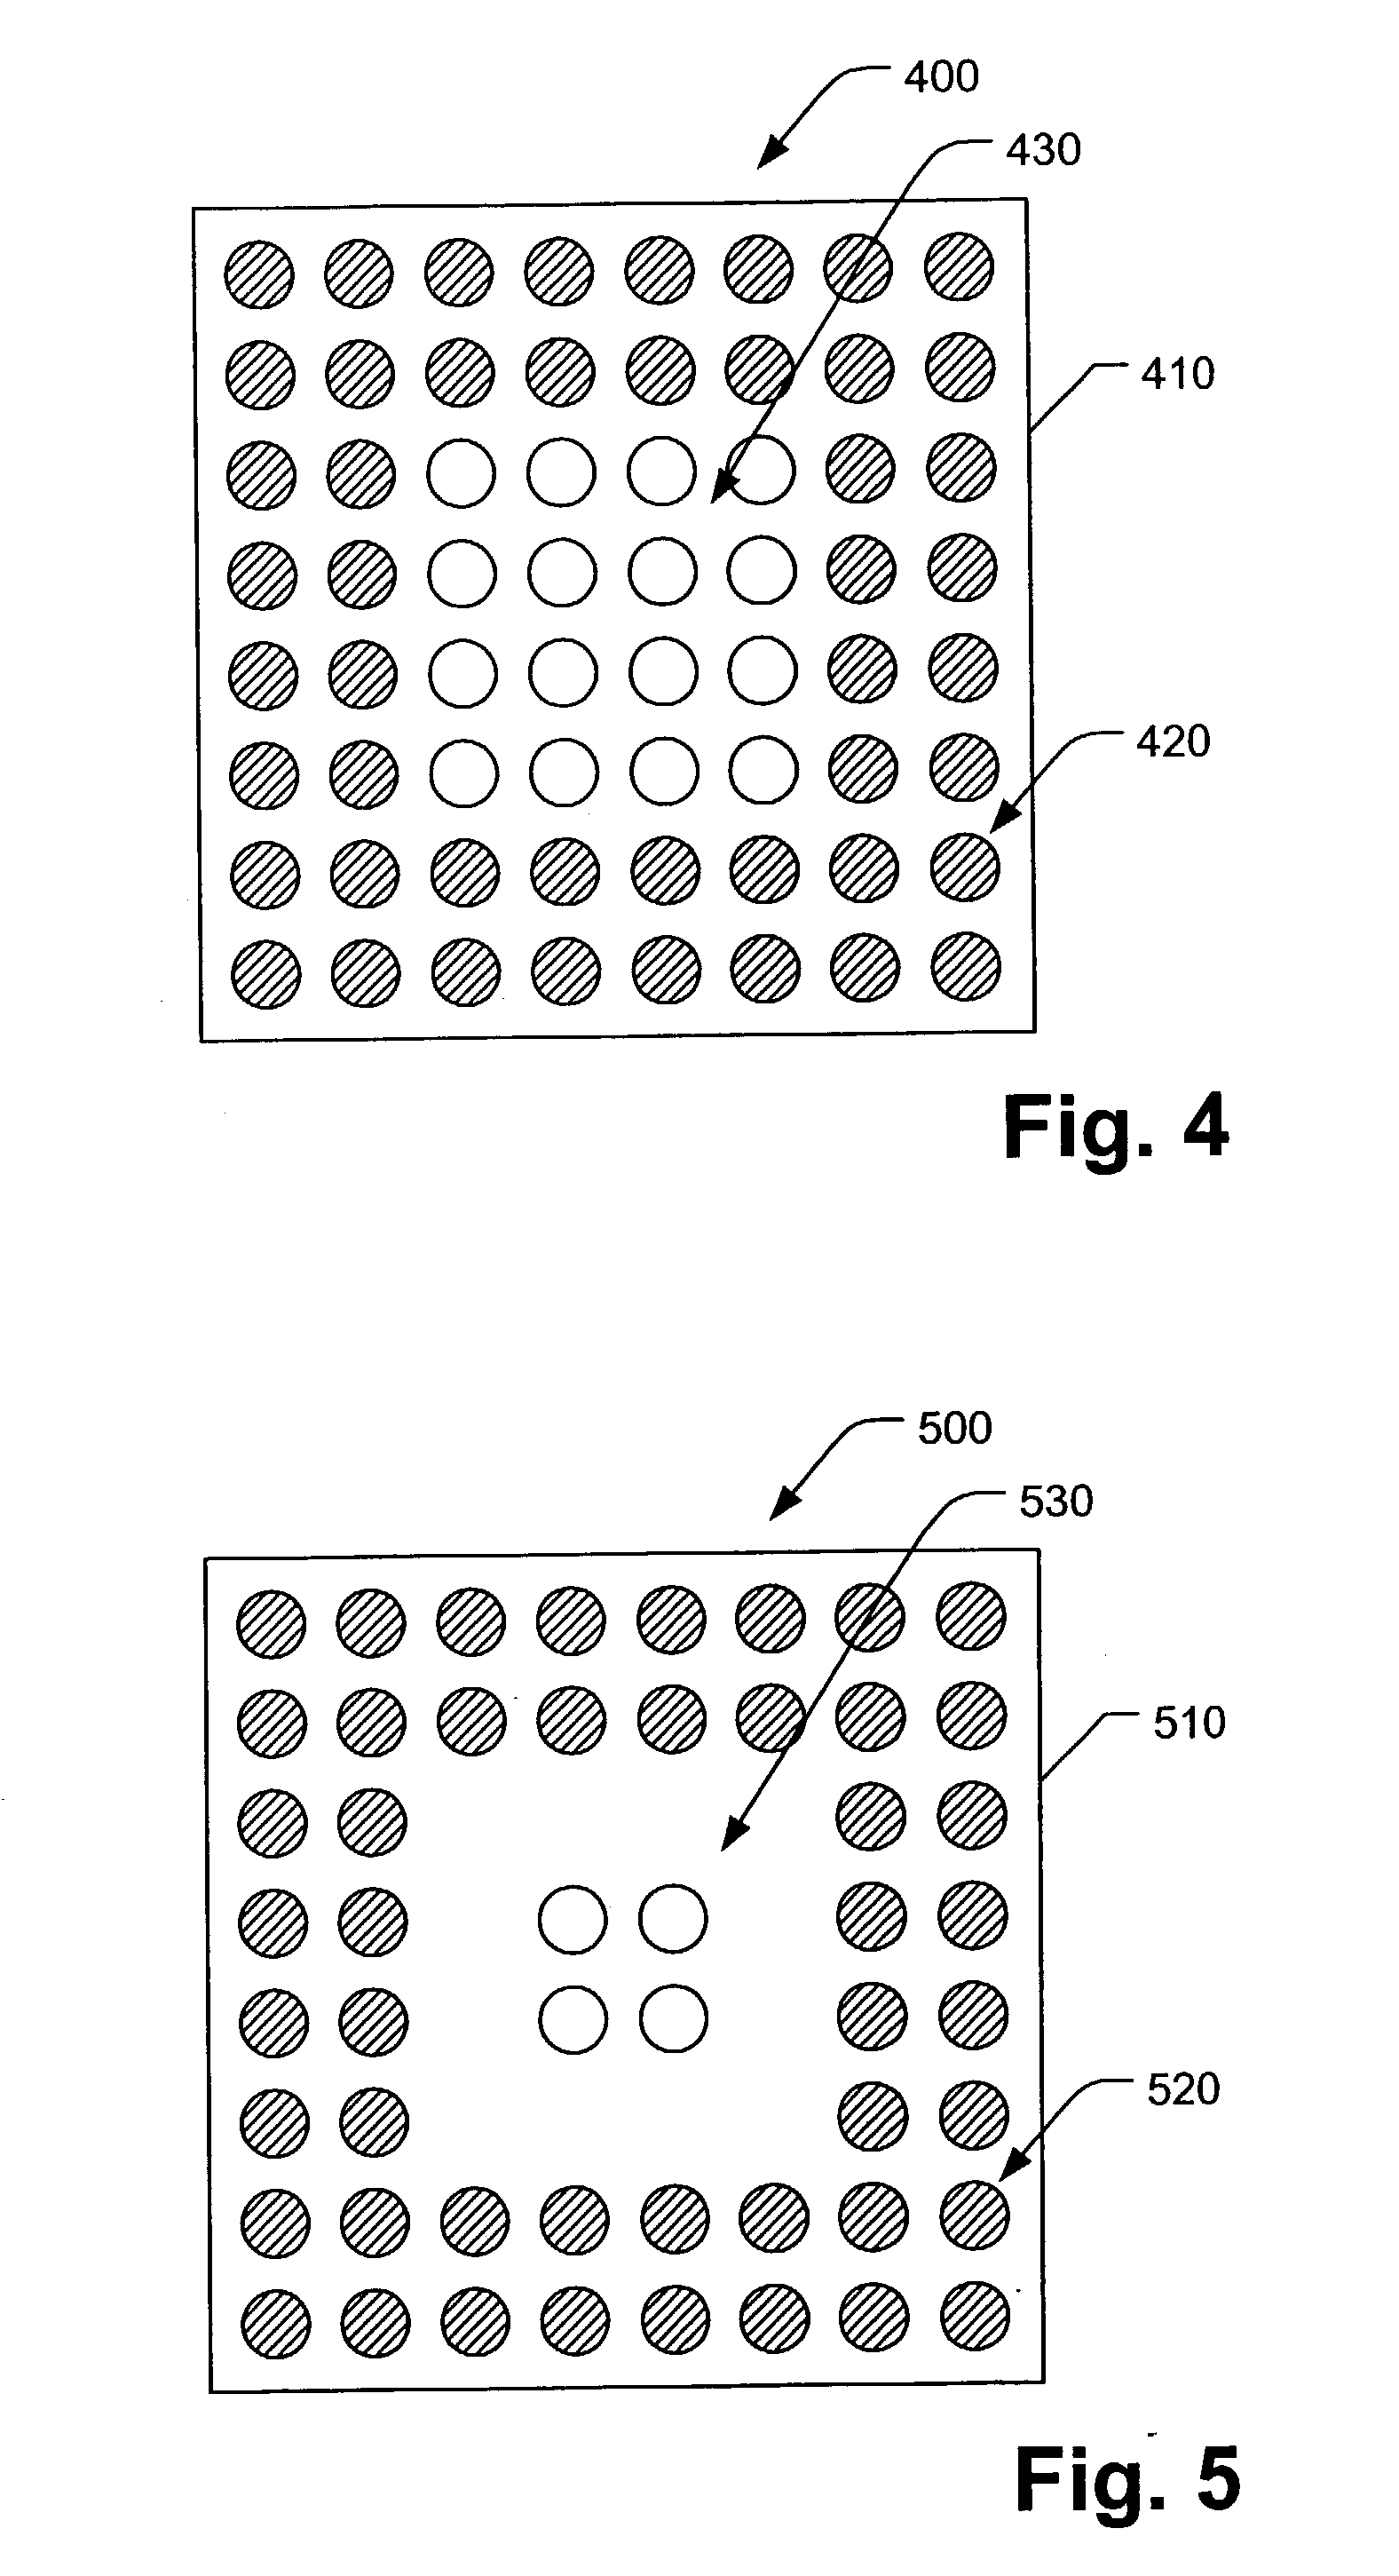 Second level packaging interconnection method with improved thermal and reliability performance